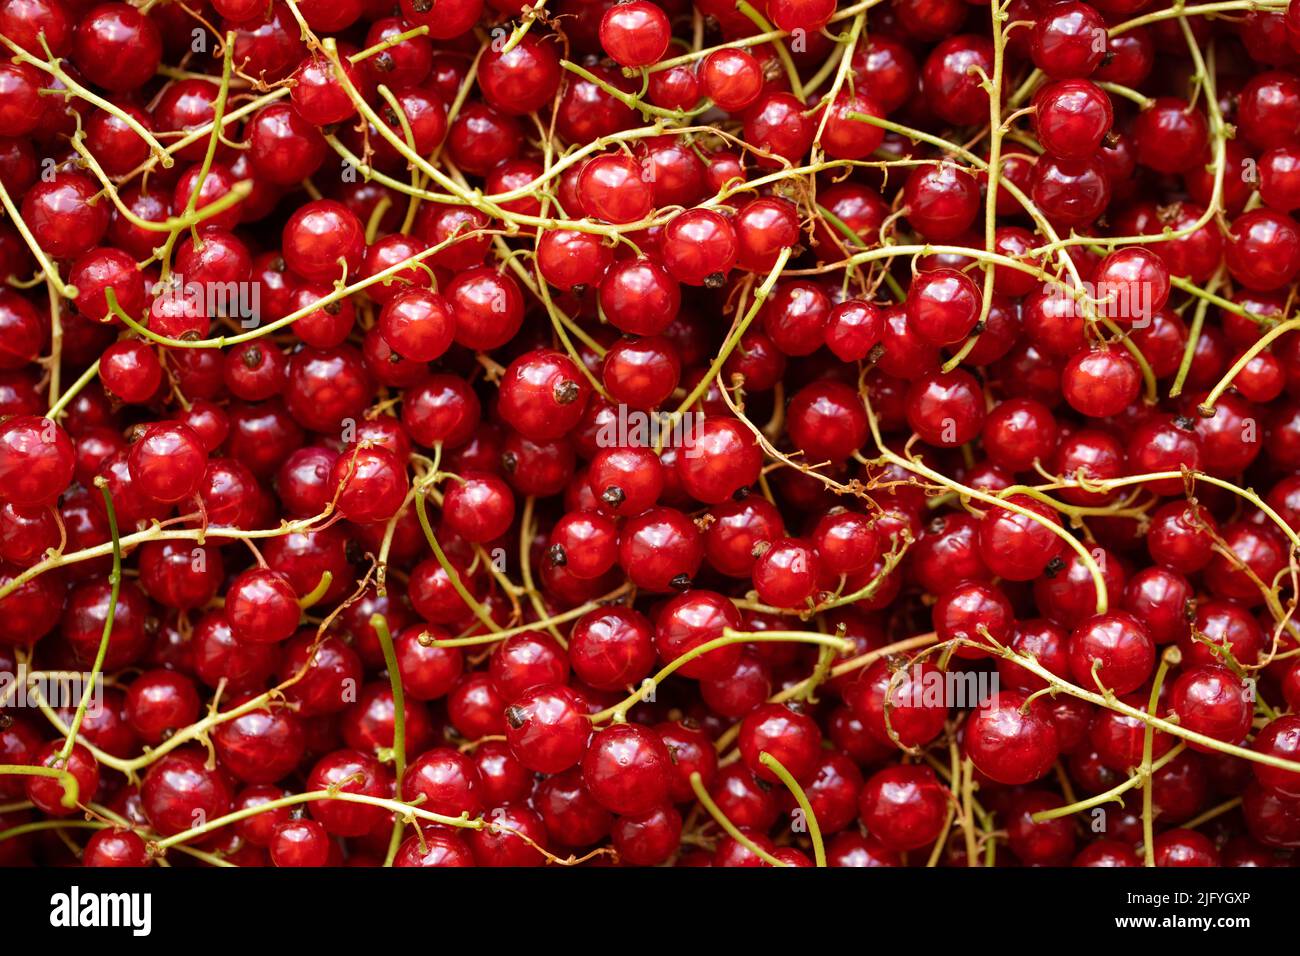 Red currant berries with stalks top view. Background with red berries. Stock Photo